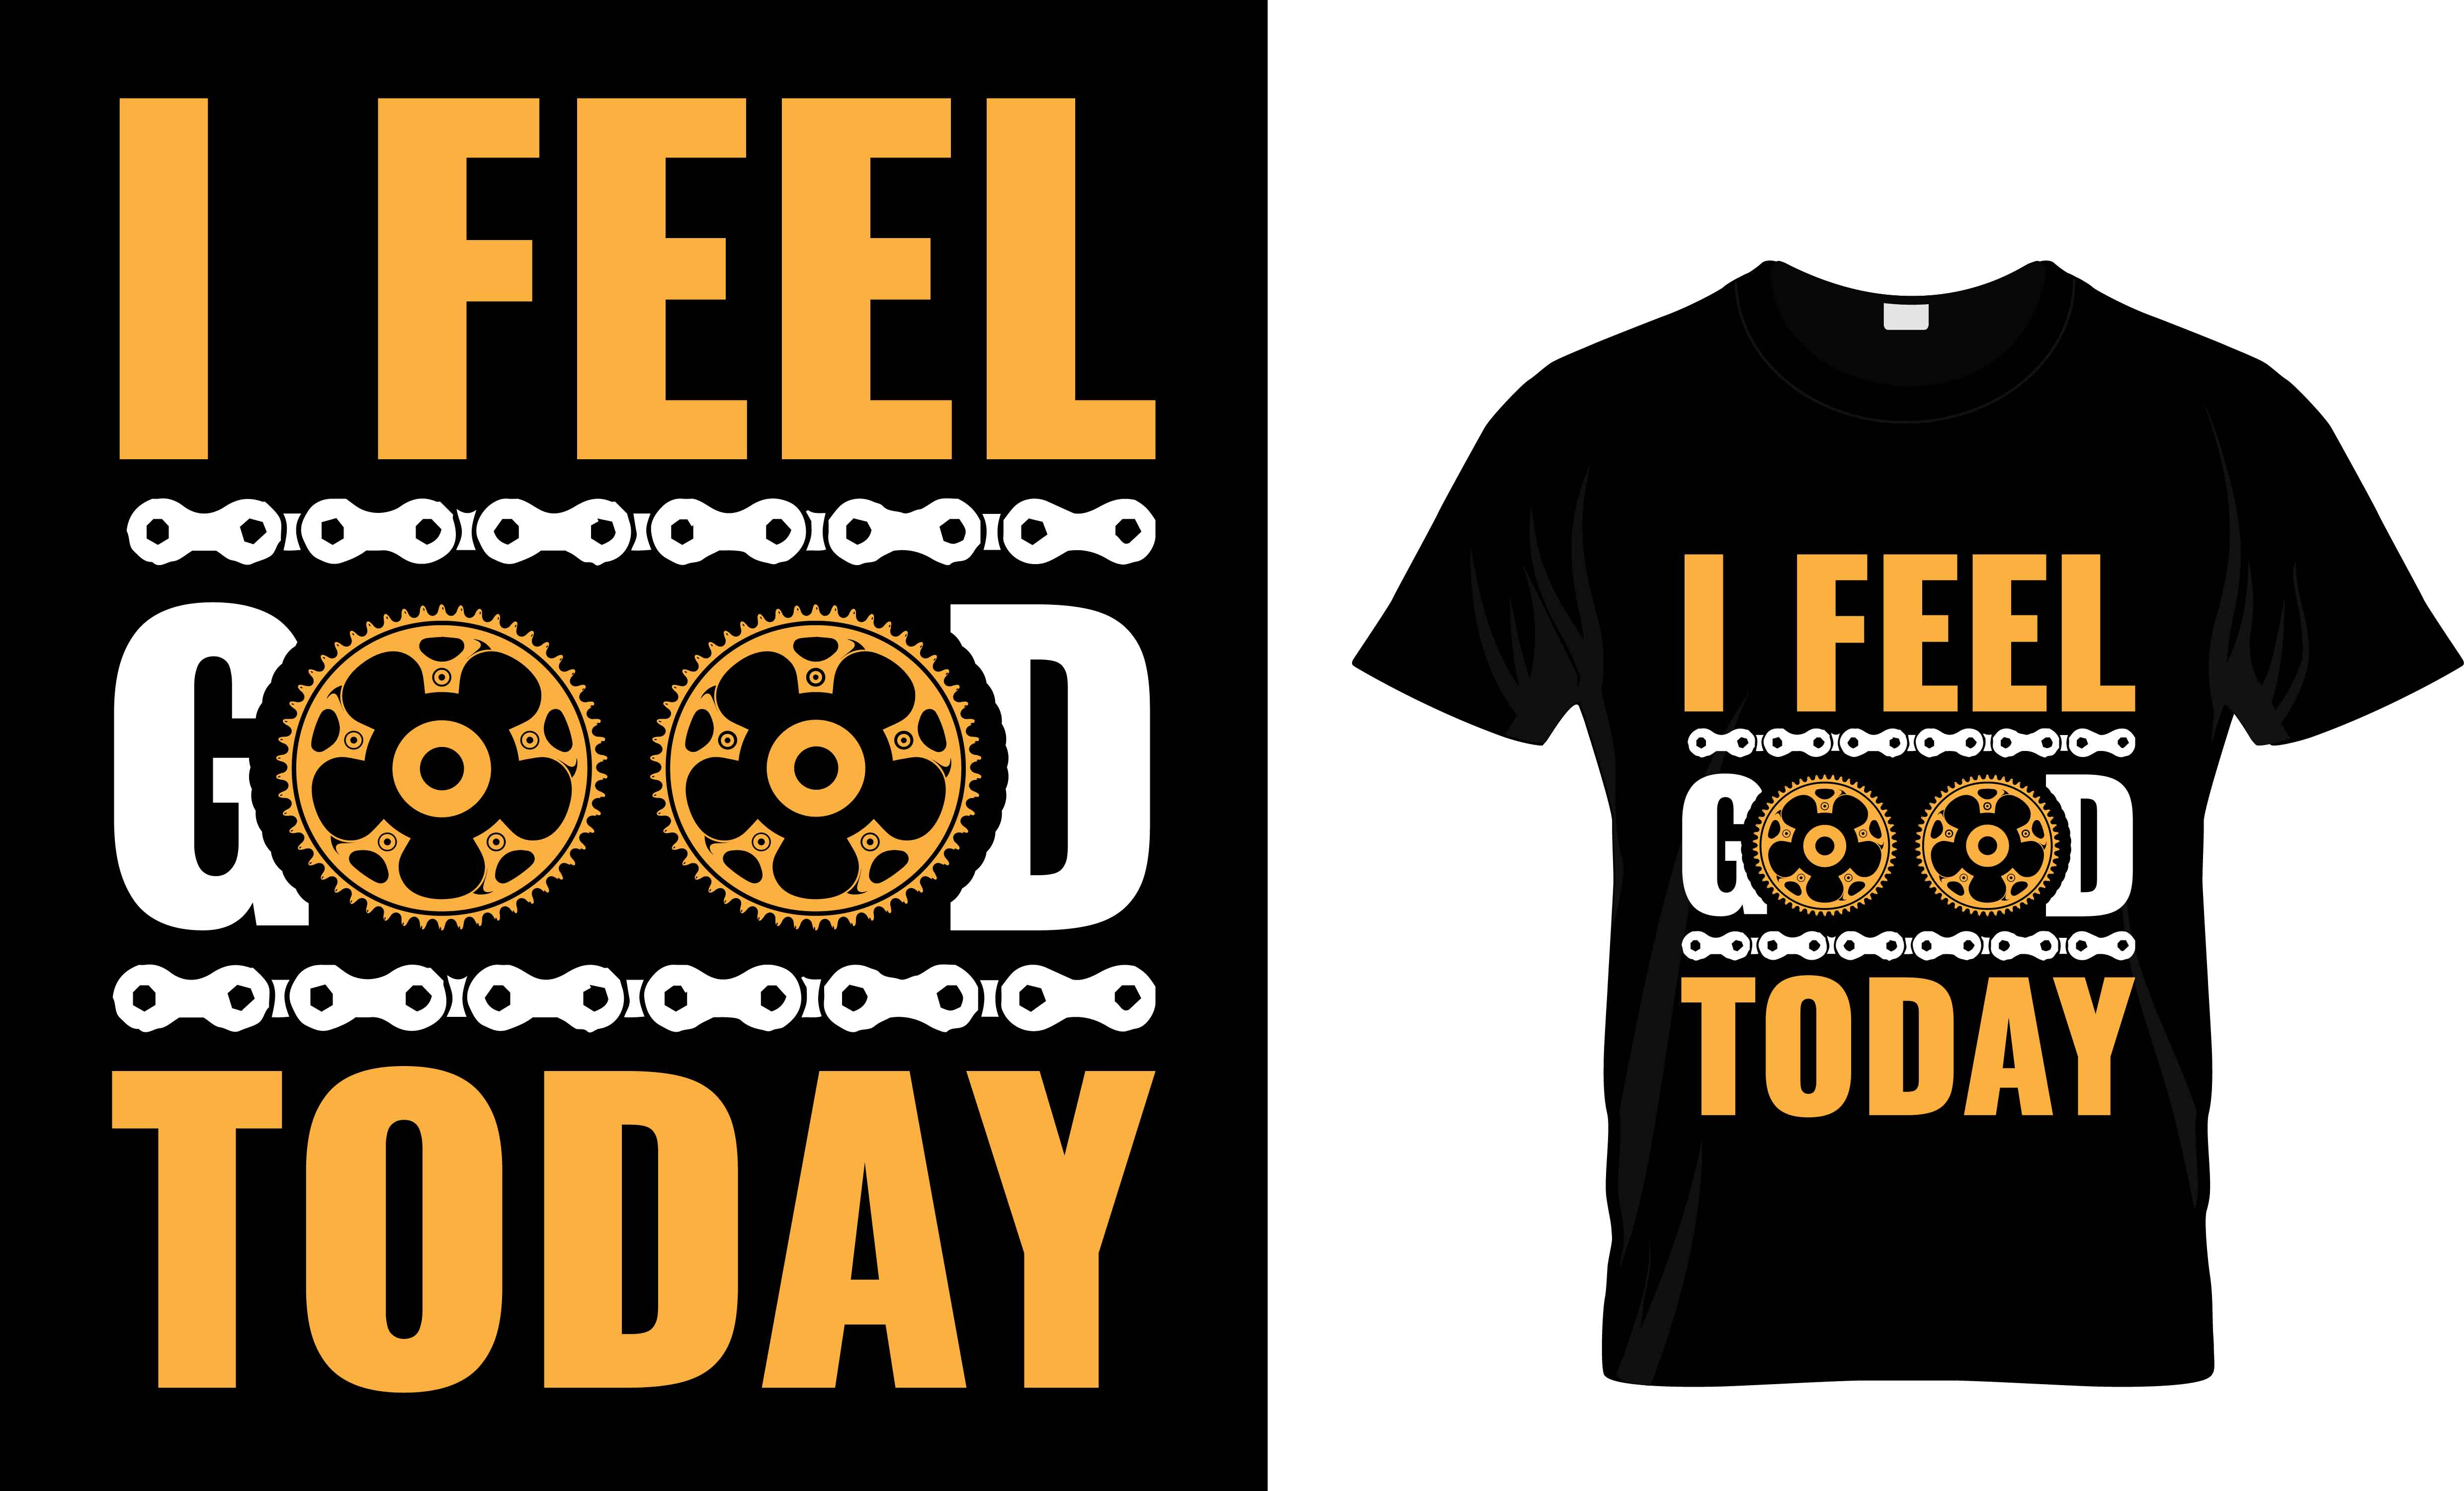 Black t-shirt with orange lettering and wheels illustration.